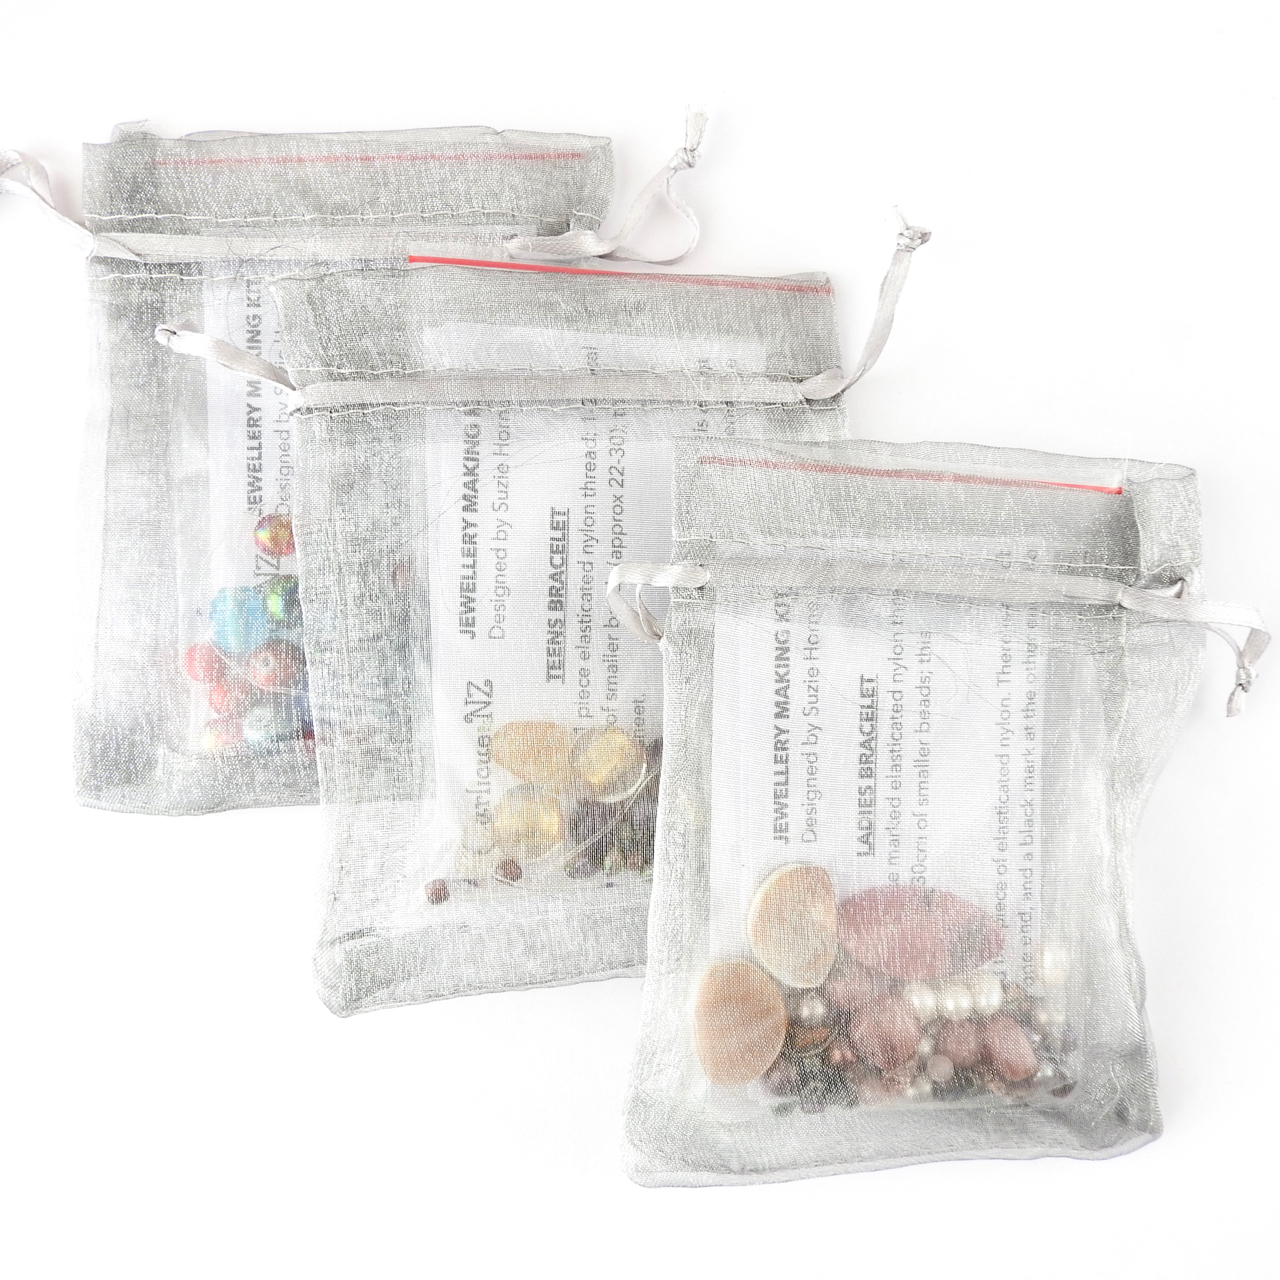 Bracelet Making Kits in their silver organza bags ready to go